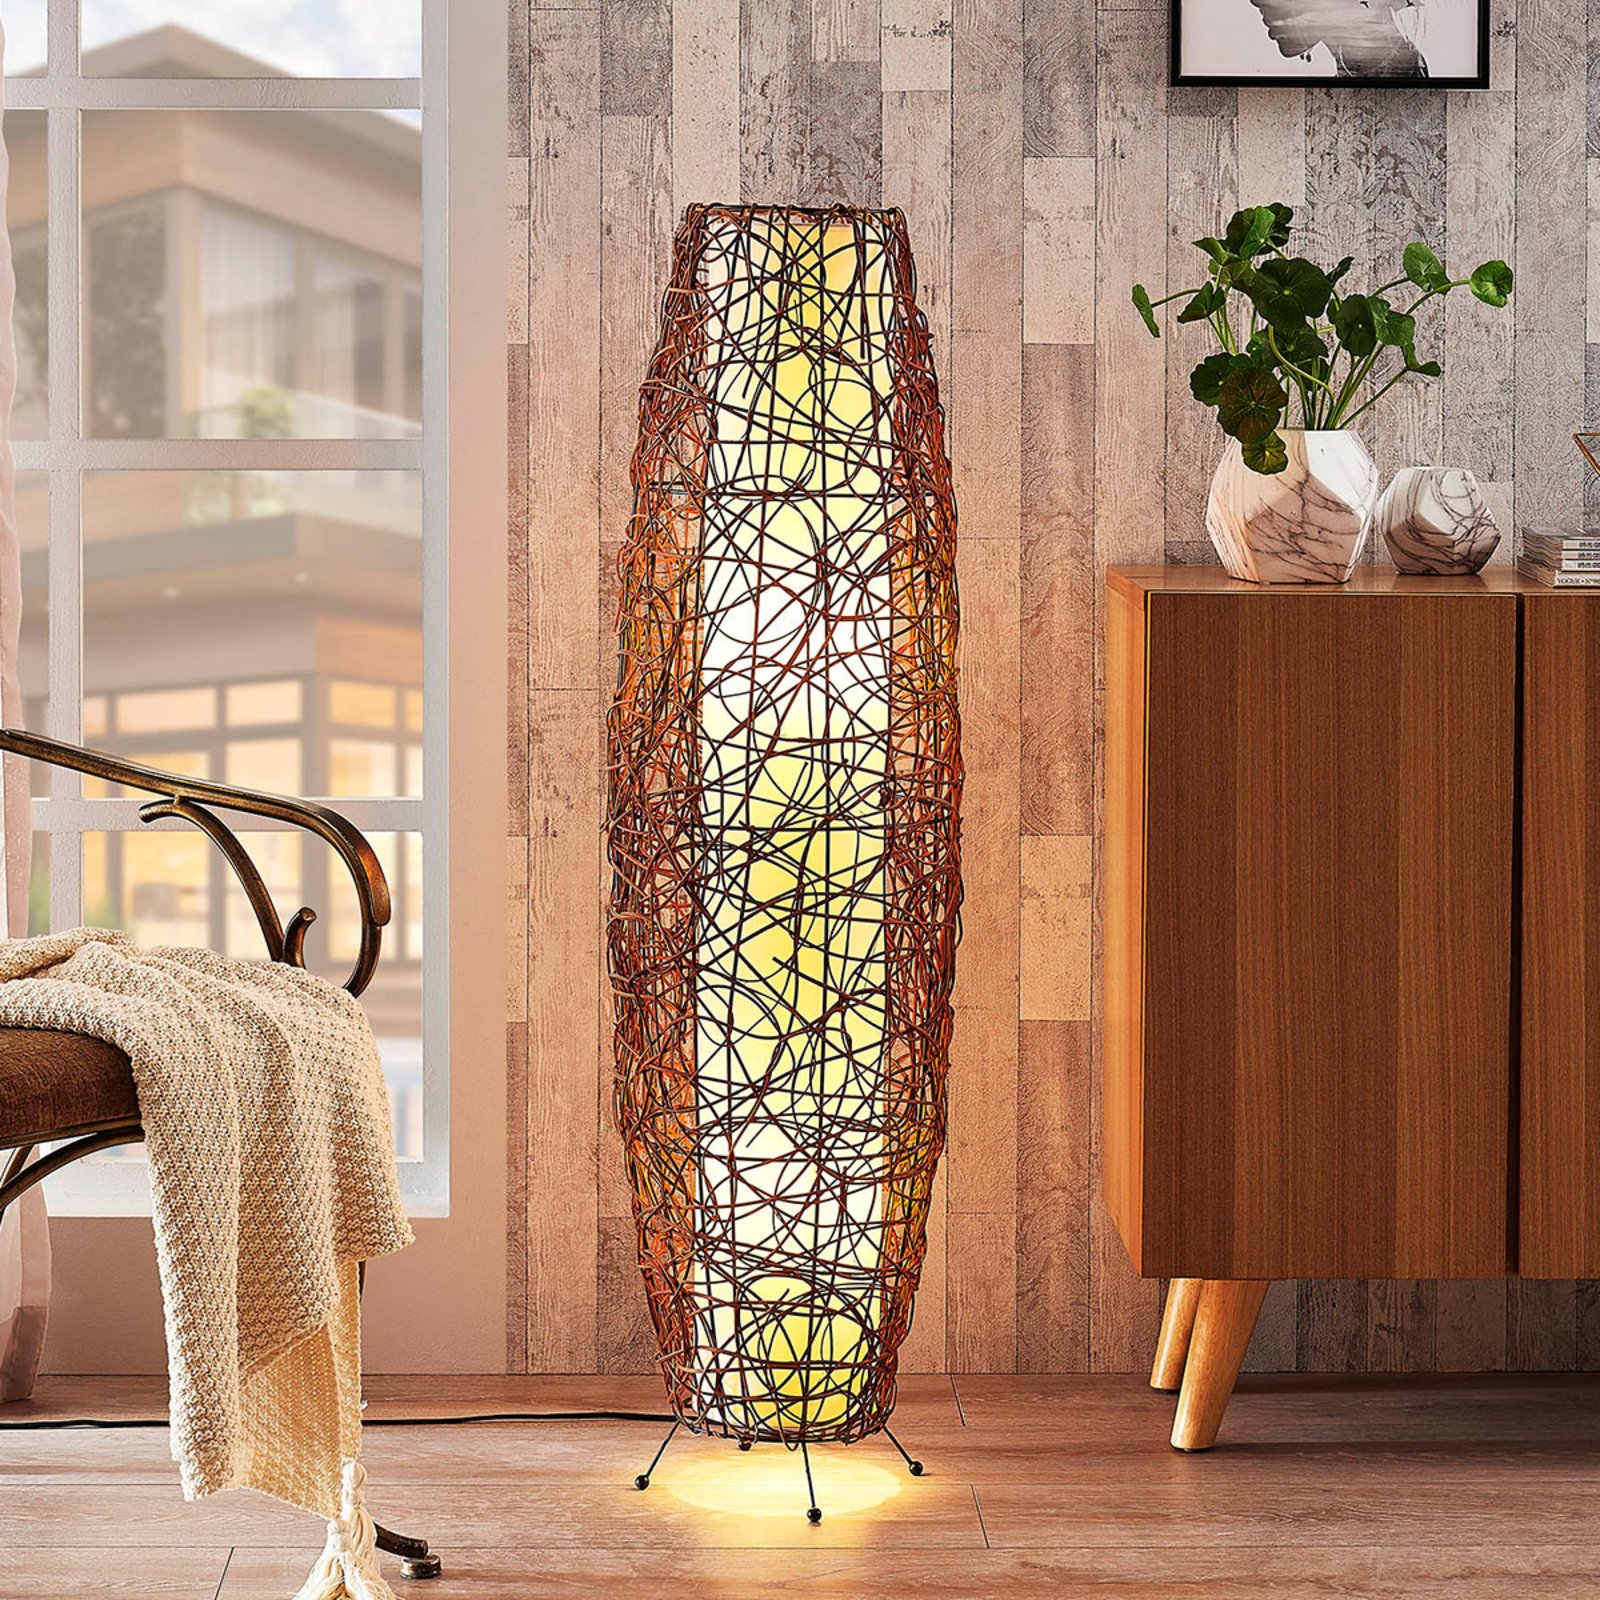 Nias floor lamp made of rattan and fabric